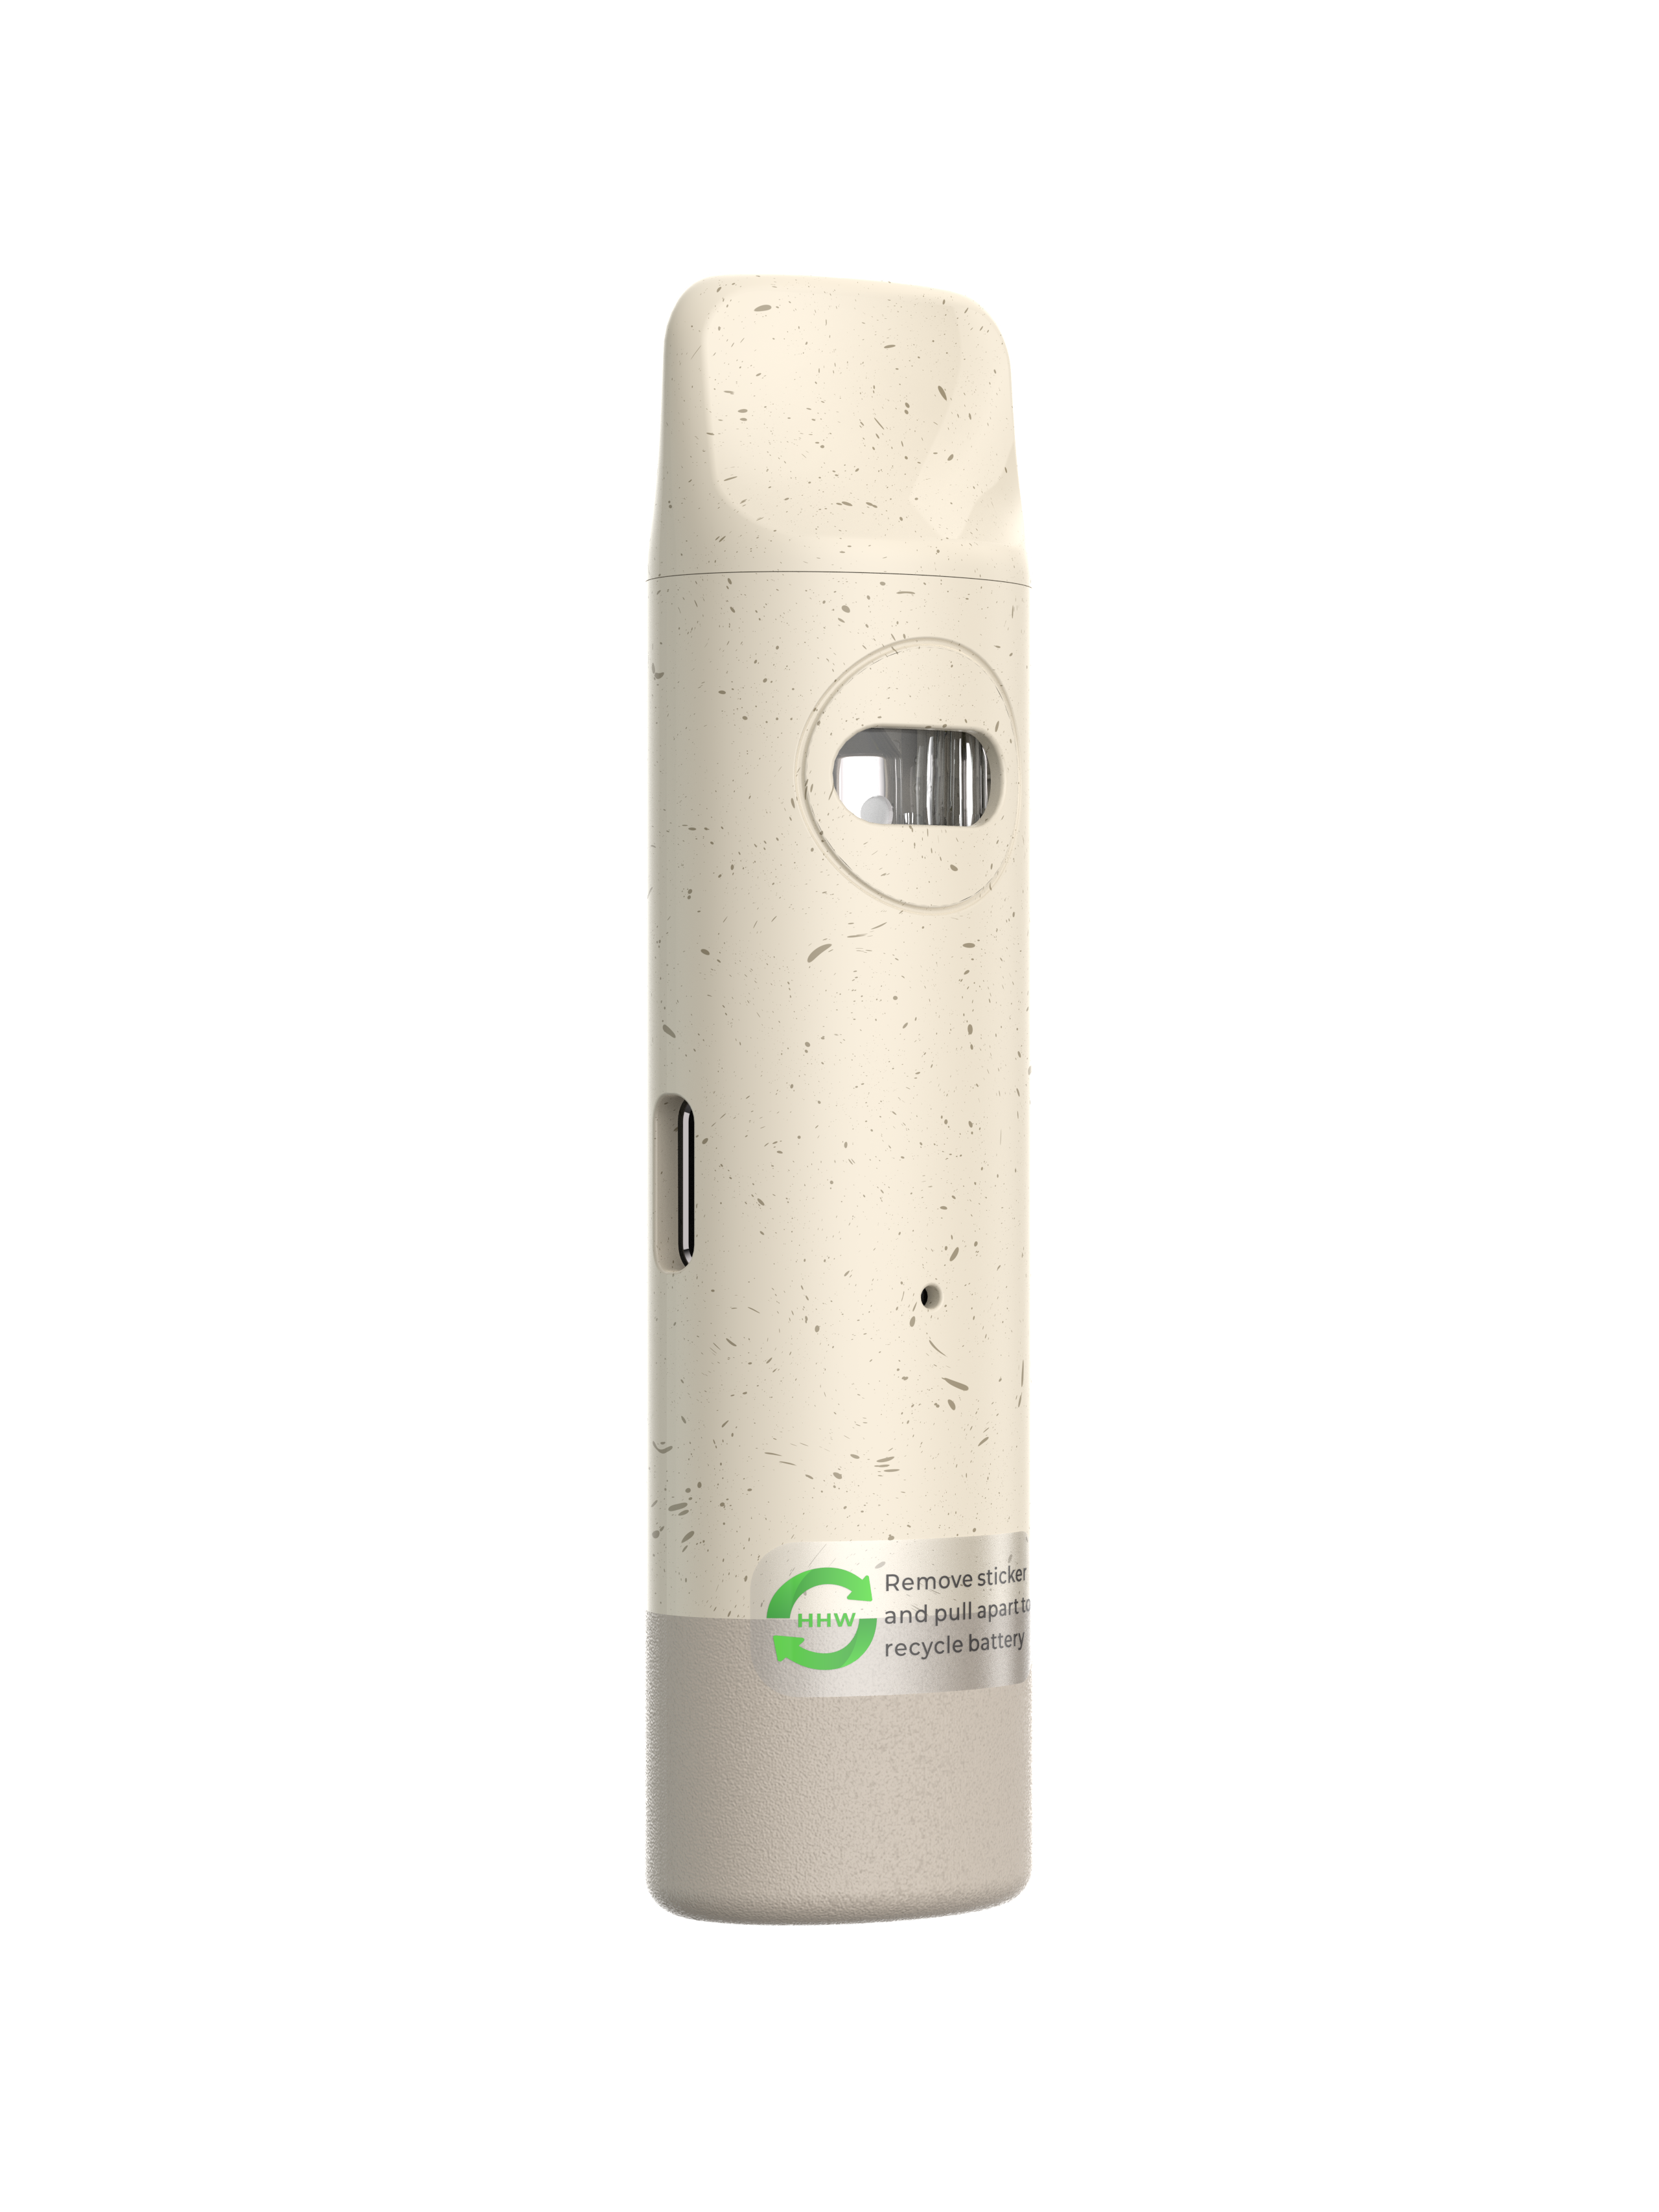 CCELL_DS6310-U Eco Star_P07